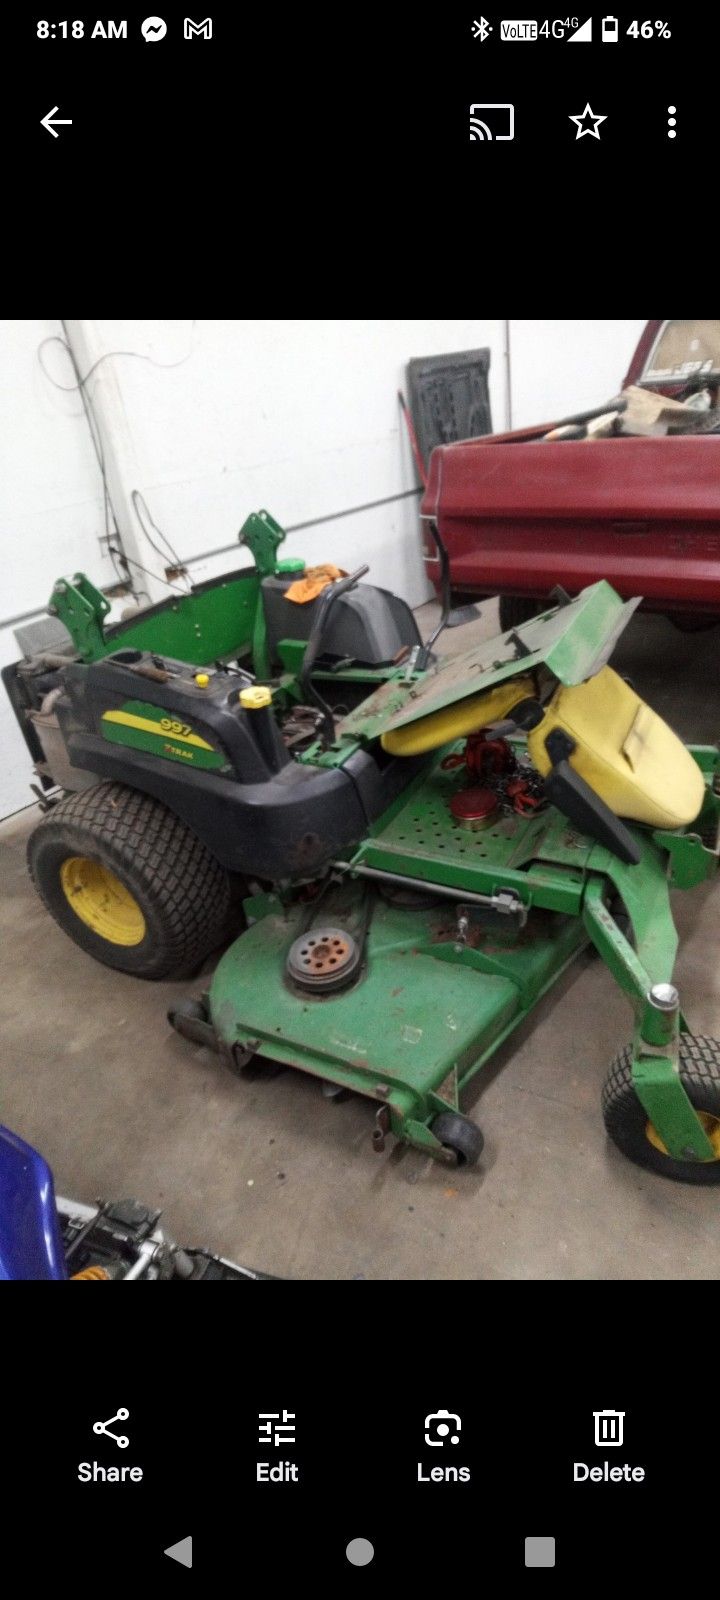 2012 John Deere Zero-turn Mower With Leaf Collector Attachment.